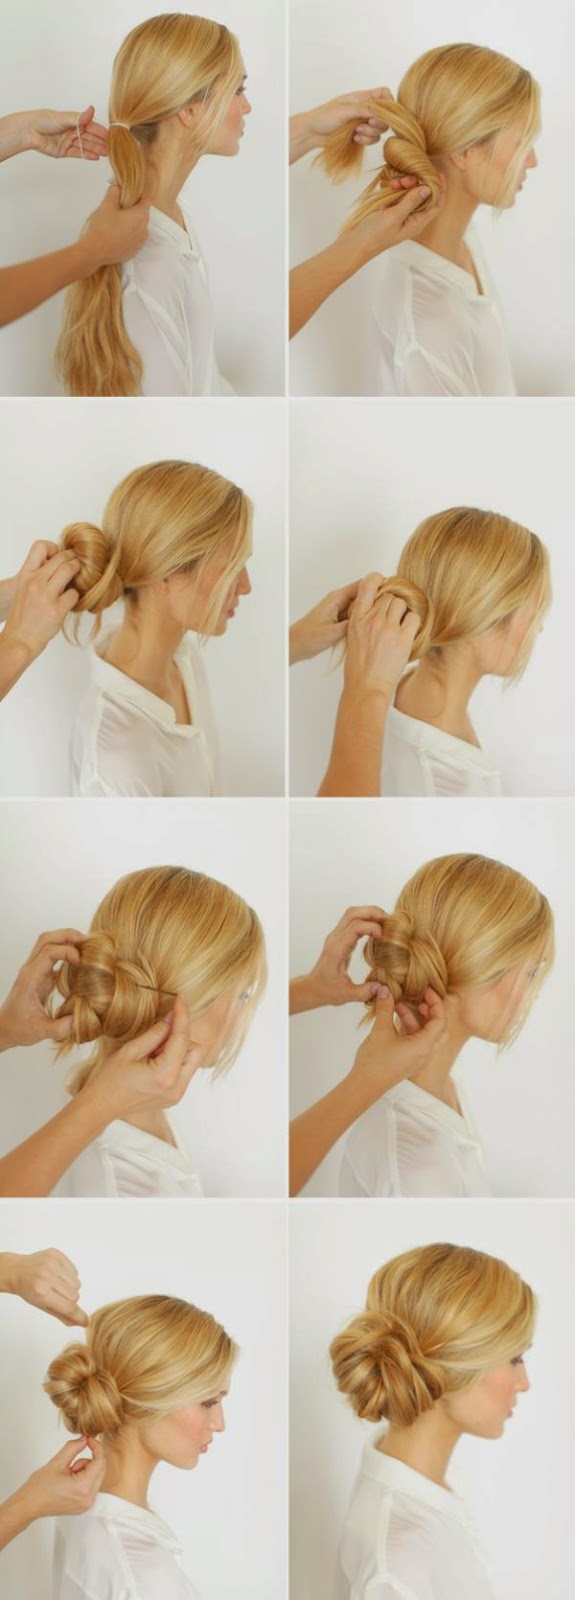 Hairstyles and Women Attire: 5 Easy Messy Buns For Long Hair Tutorial